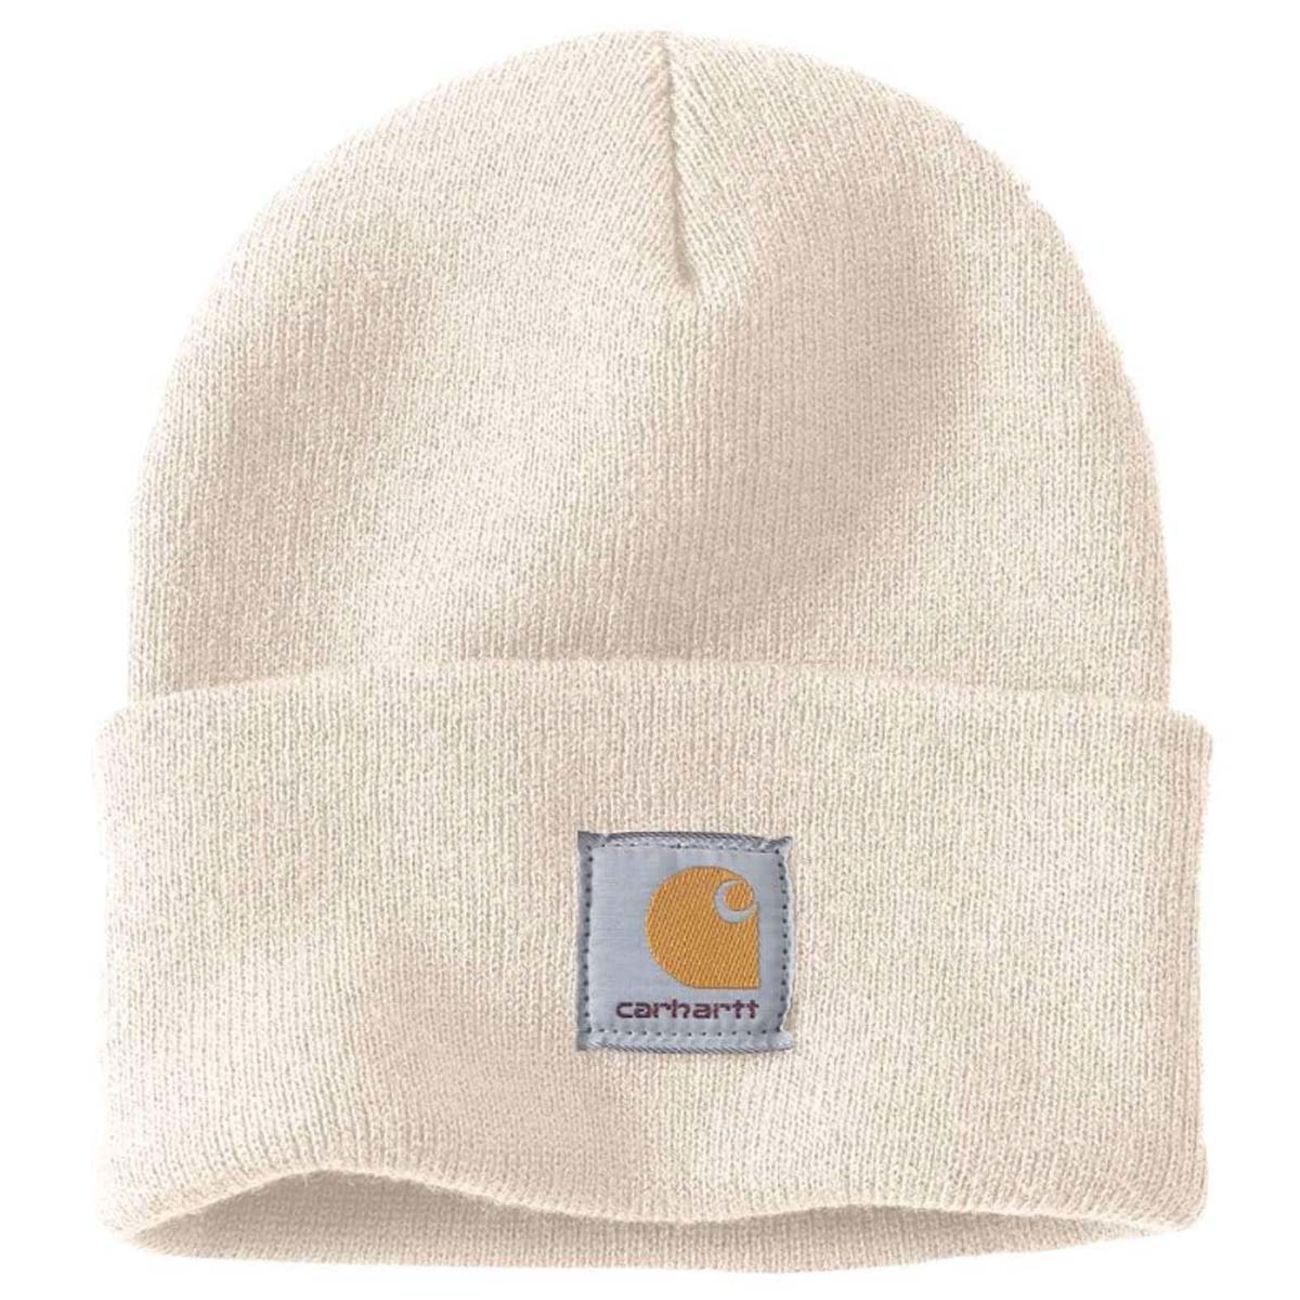 KNITTED HAT WITH LOGO WHITE 2103378892319